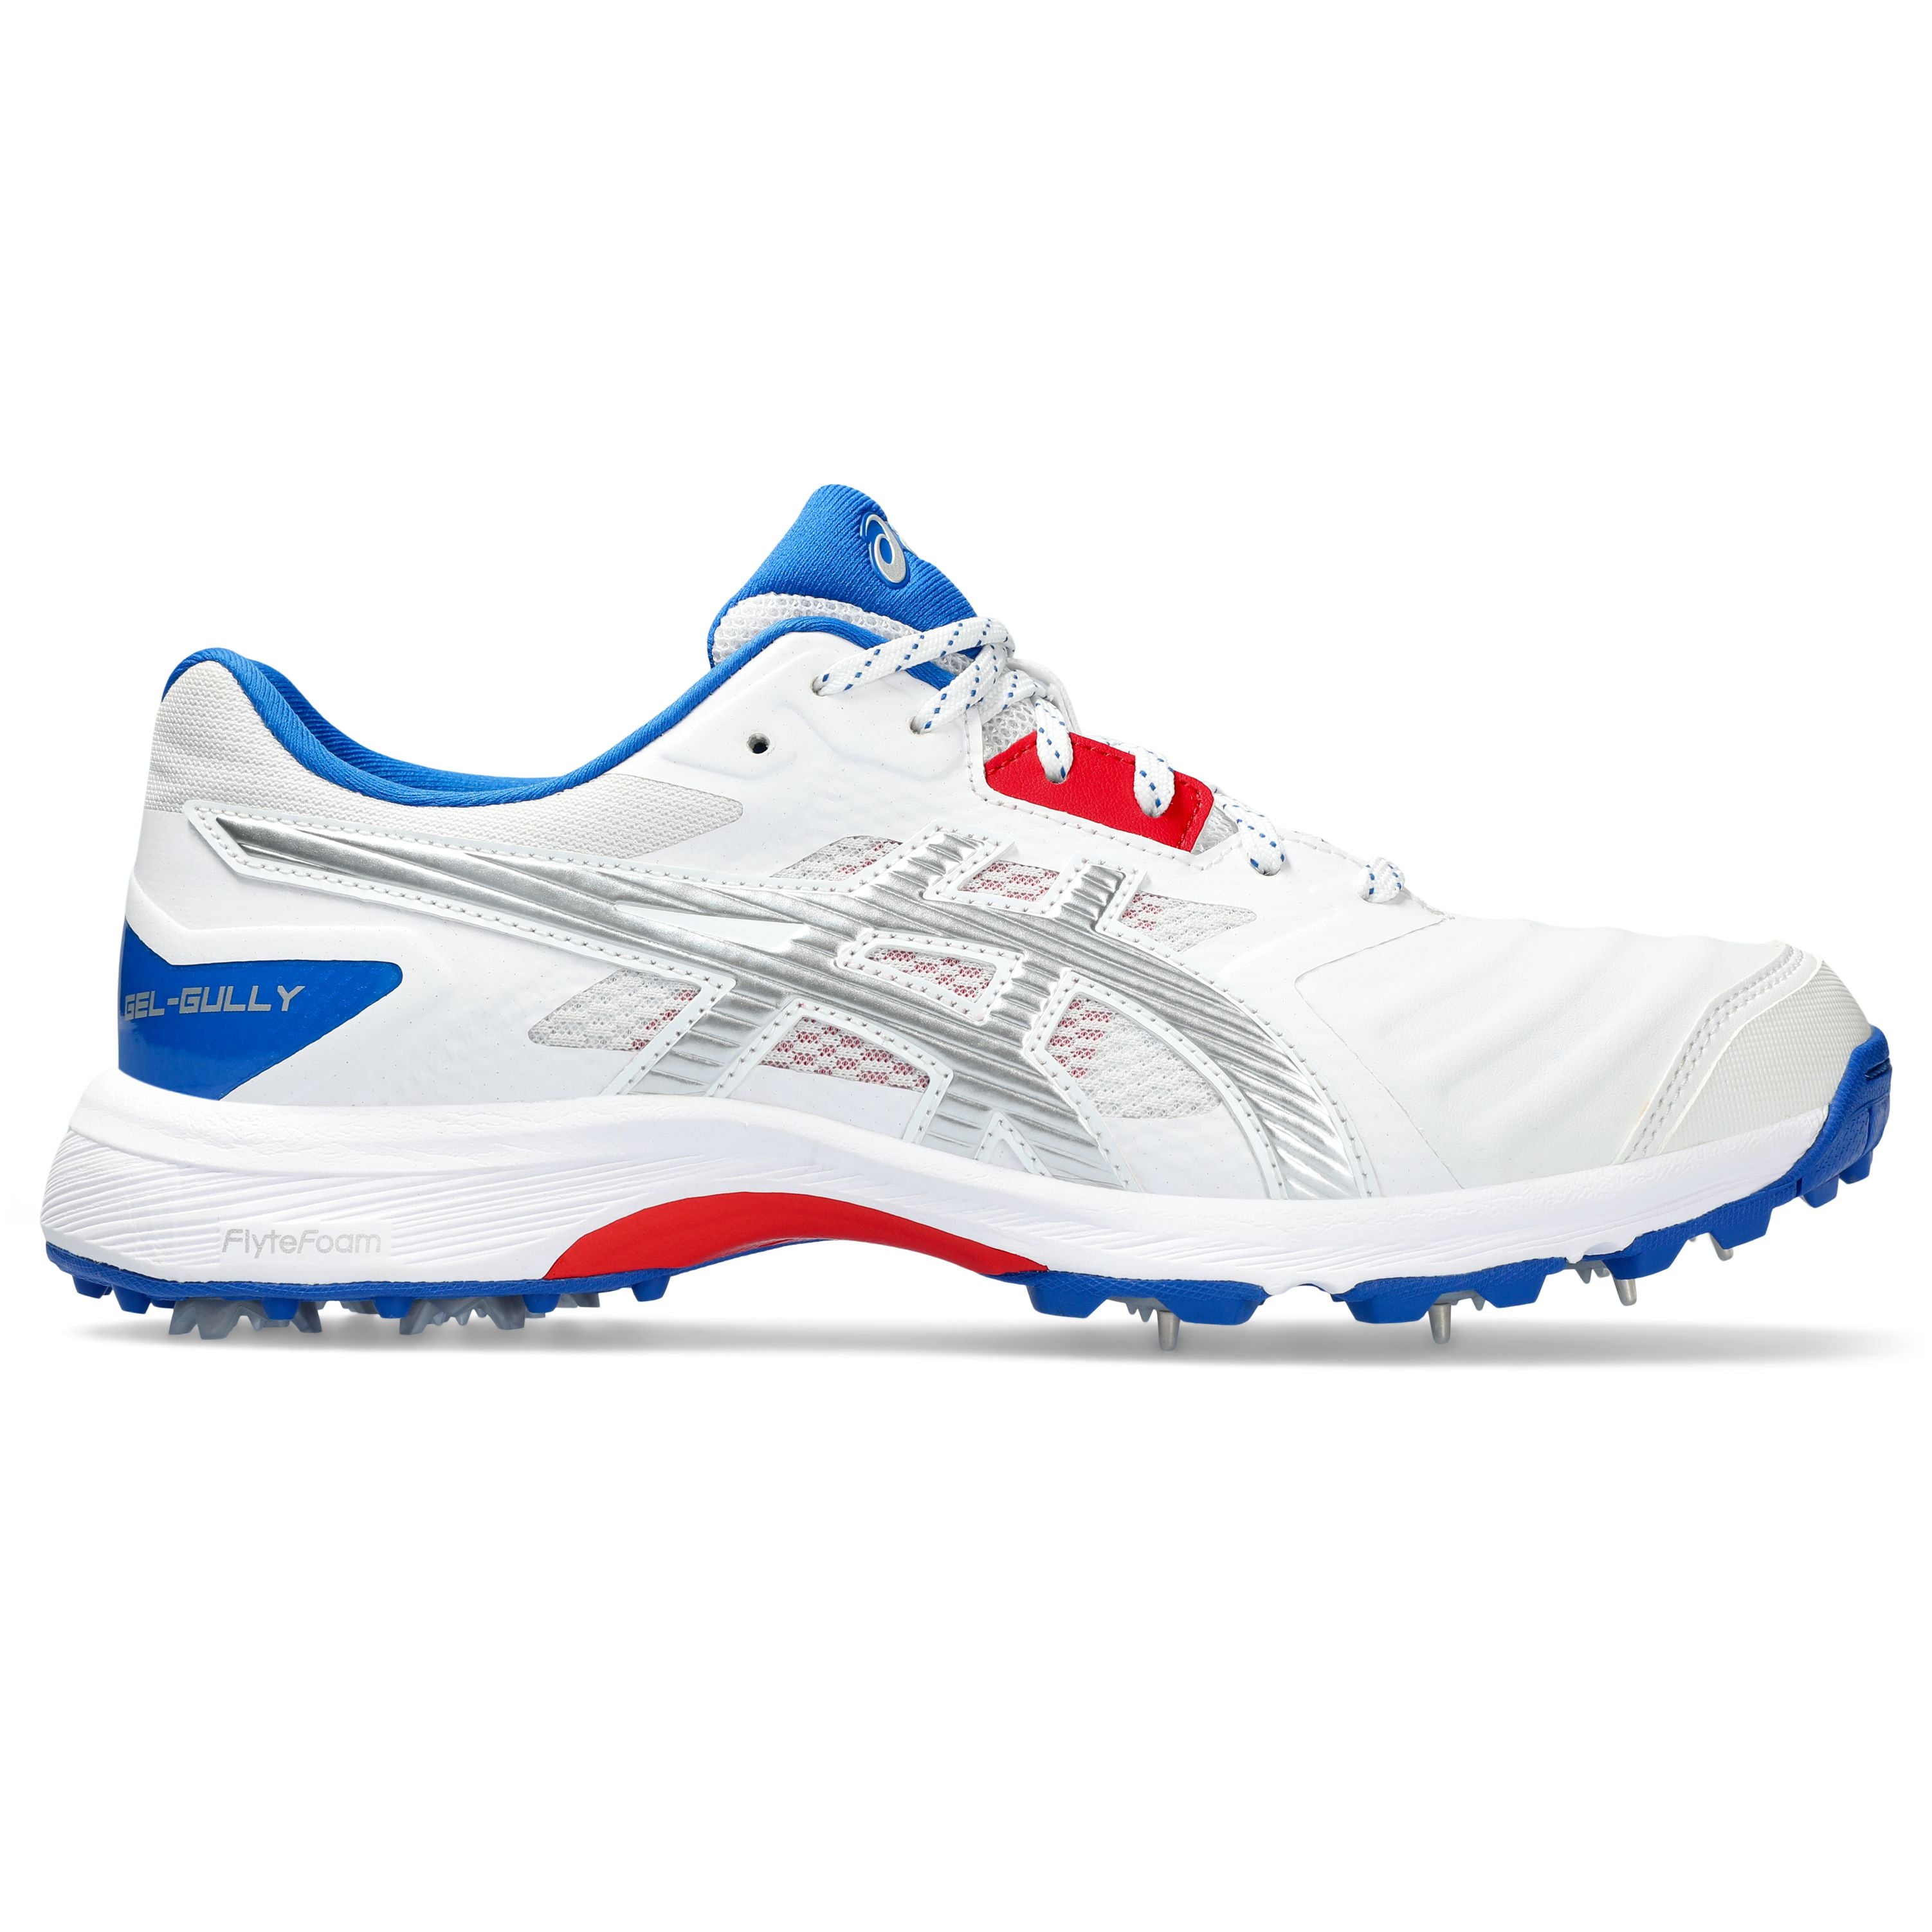 Asics Gel Gully 7 Steel Spikes Cricket Shoes